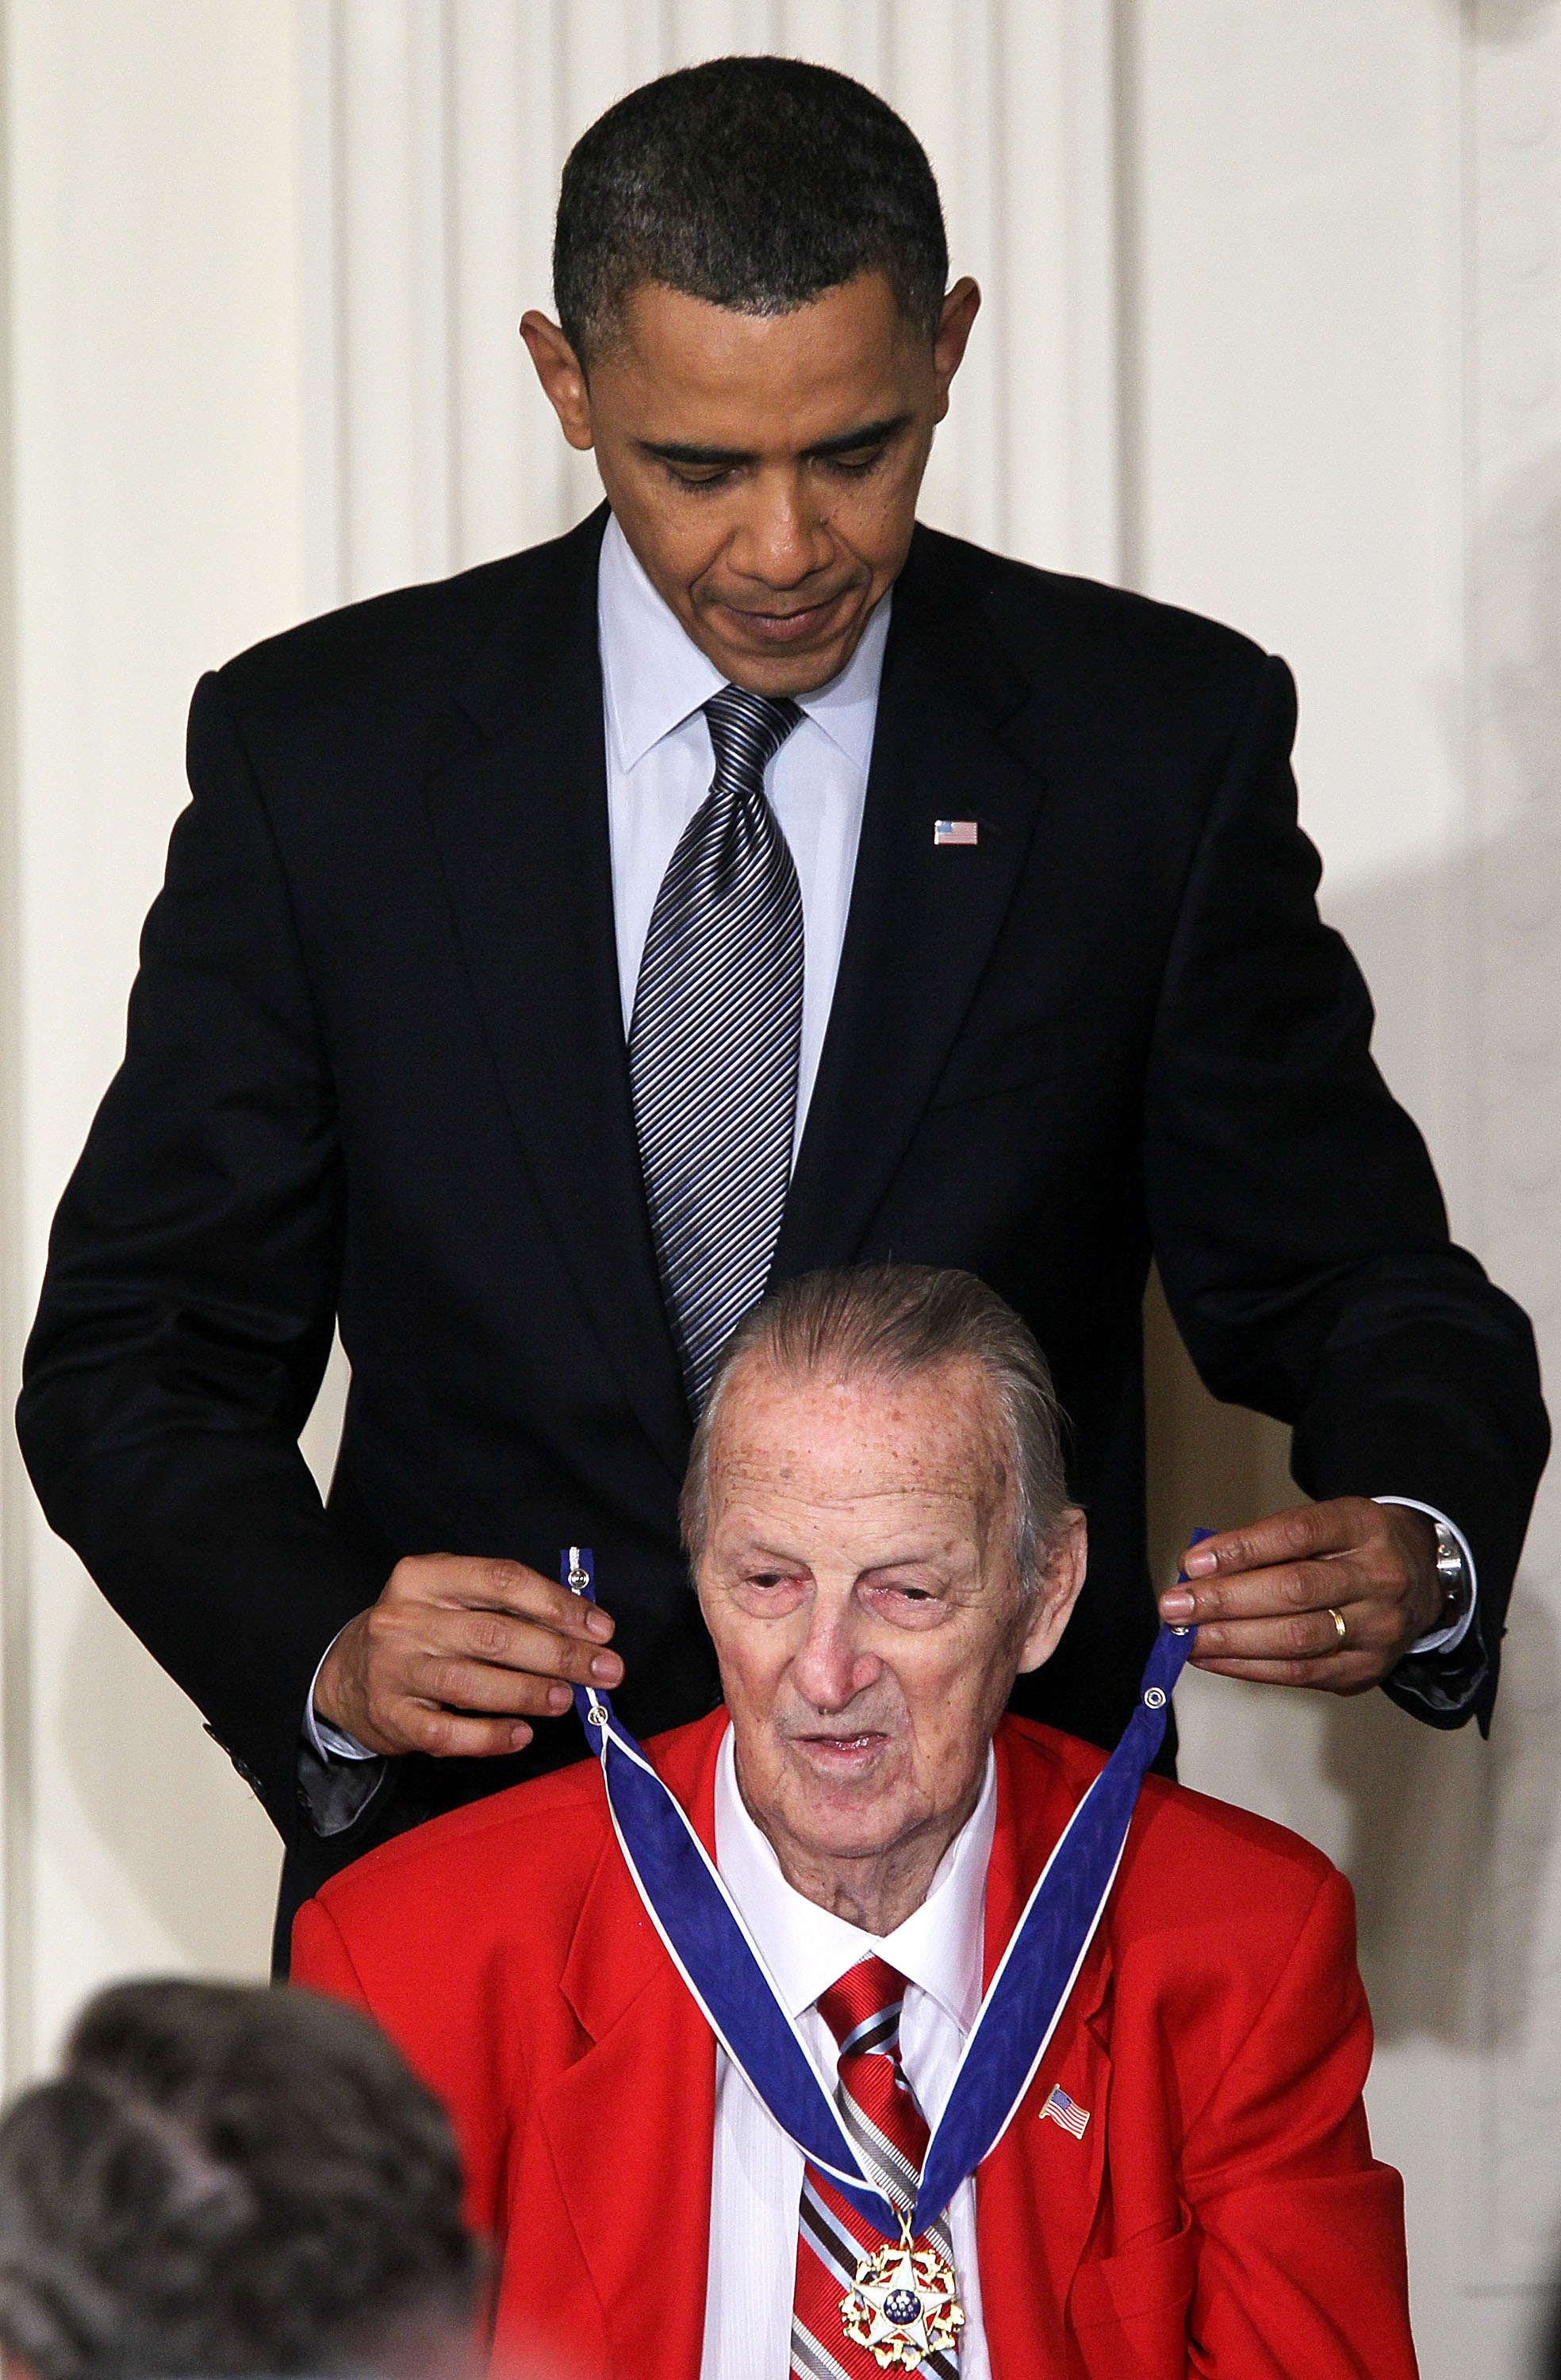 WASHINGTON, DC - FEBRUARY 15:   Baseball Hall of Fame member Stan Musial is presented with the 2010 Medal of Freedom by U.S. President Barack Obama during an East Room event at the White House February 15, 2011 in Washington, DC. Obama presented the medal